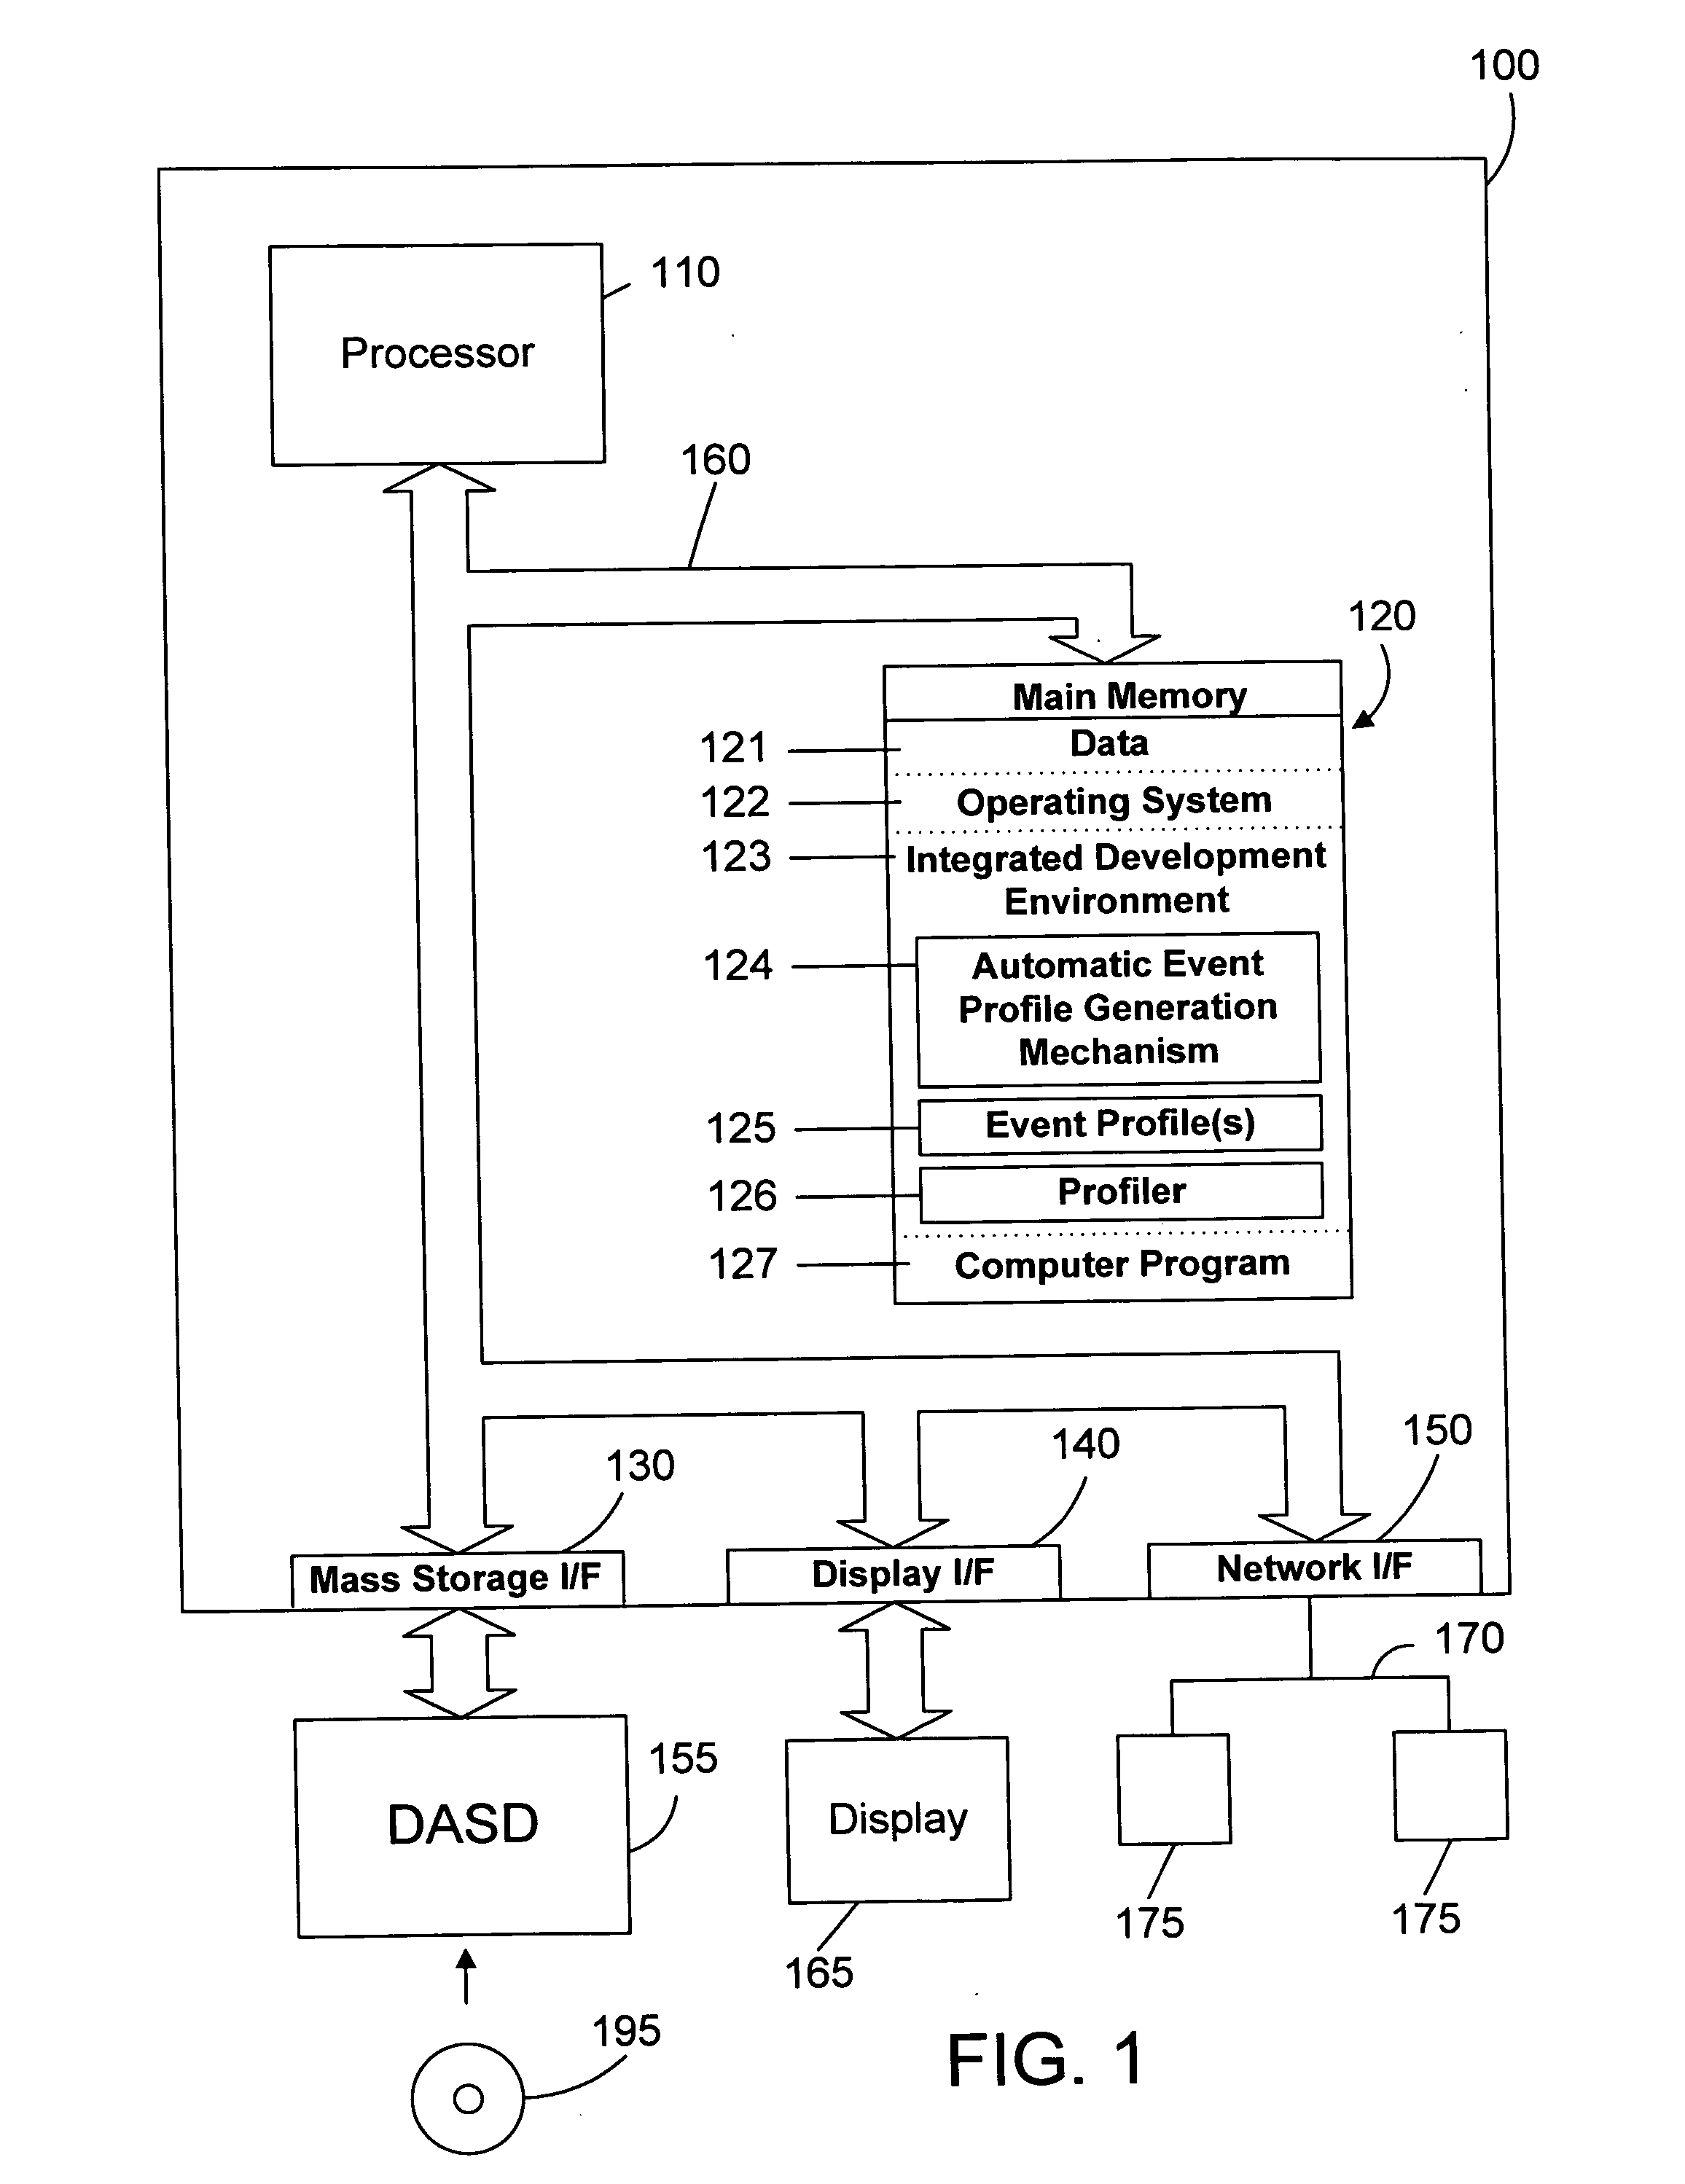 Apparatus and method for automatic generation of event profiles in an integrated development environment